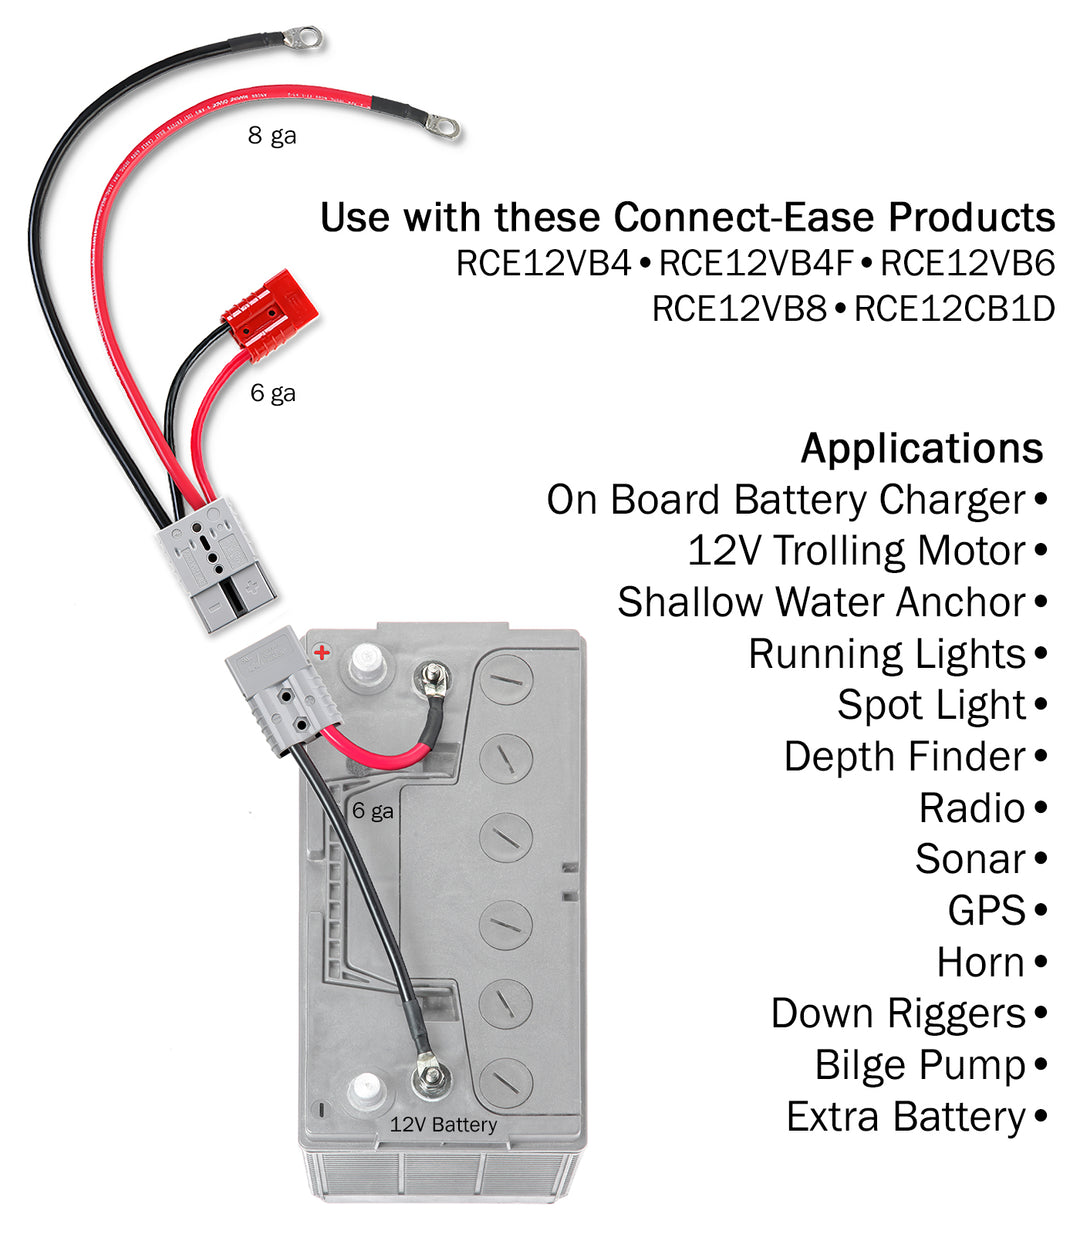 Camper Connection with Auxiliary Connector (RCE12VBM6K) Lithium Compatible - Connect-Ease. Connect all your marine equipment with ease.